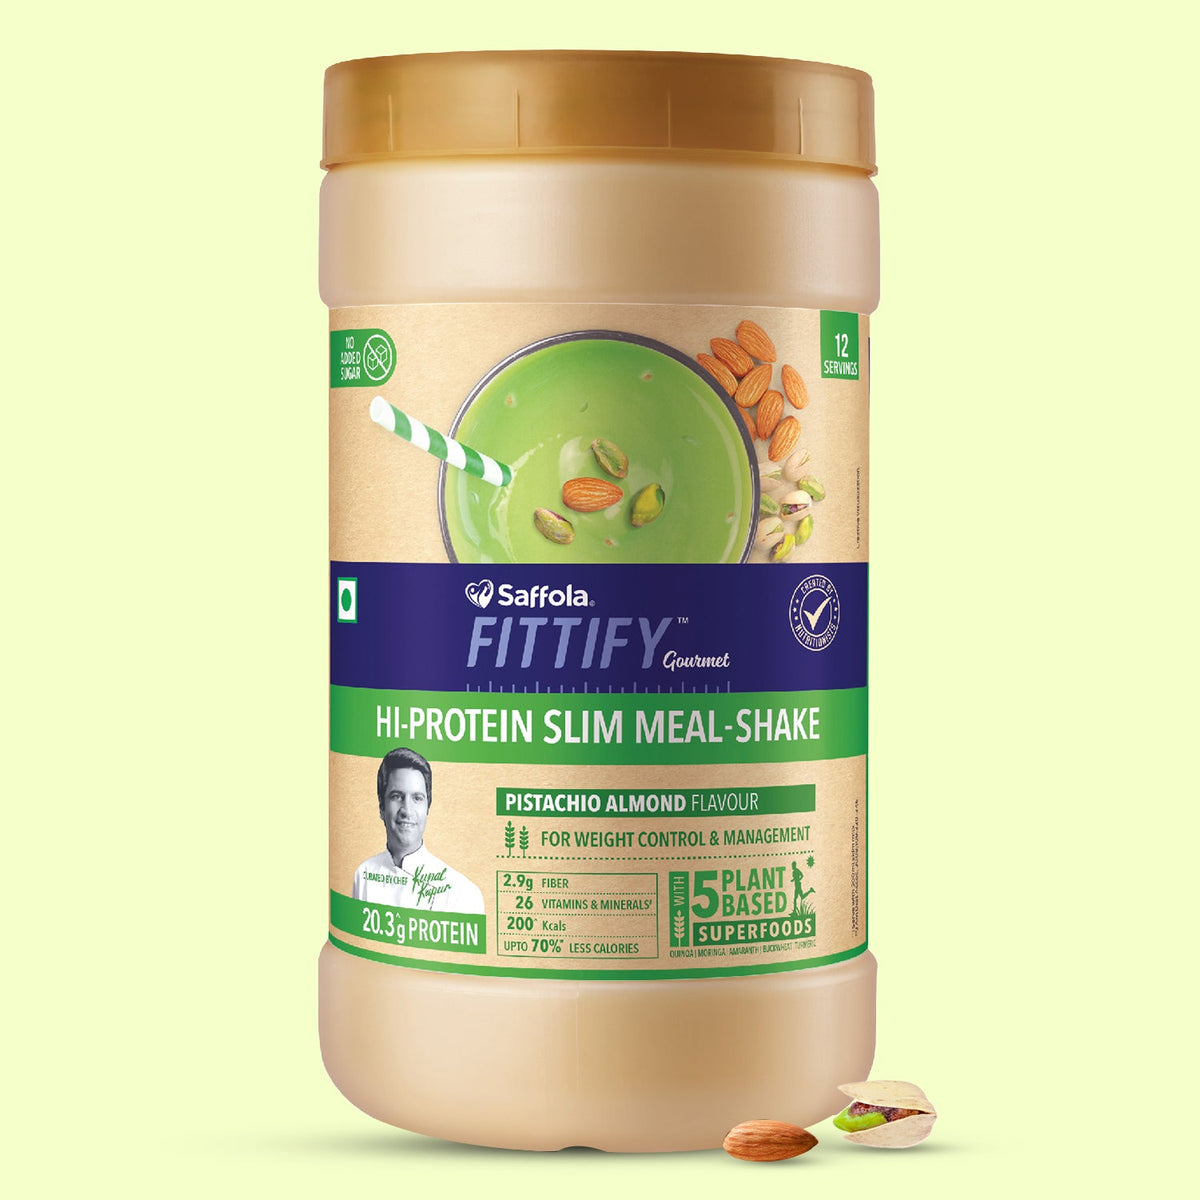 [CRED] Saffola Fittify Hi-Protein Slim Meal Shake - Pistachio Almond - Pack of 1 - 420g